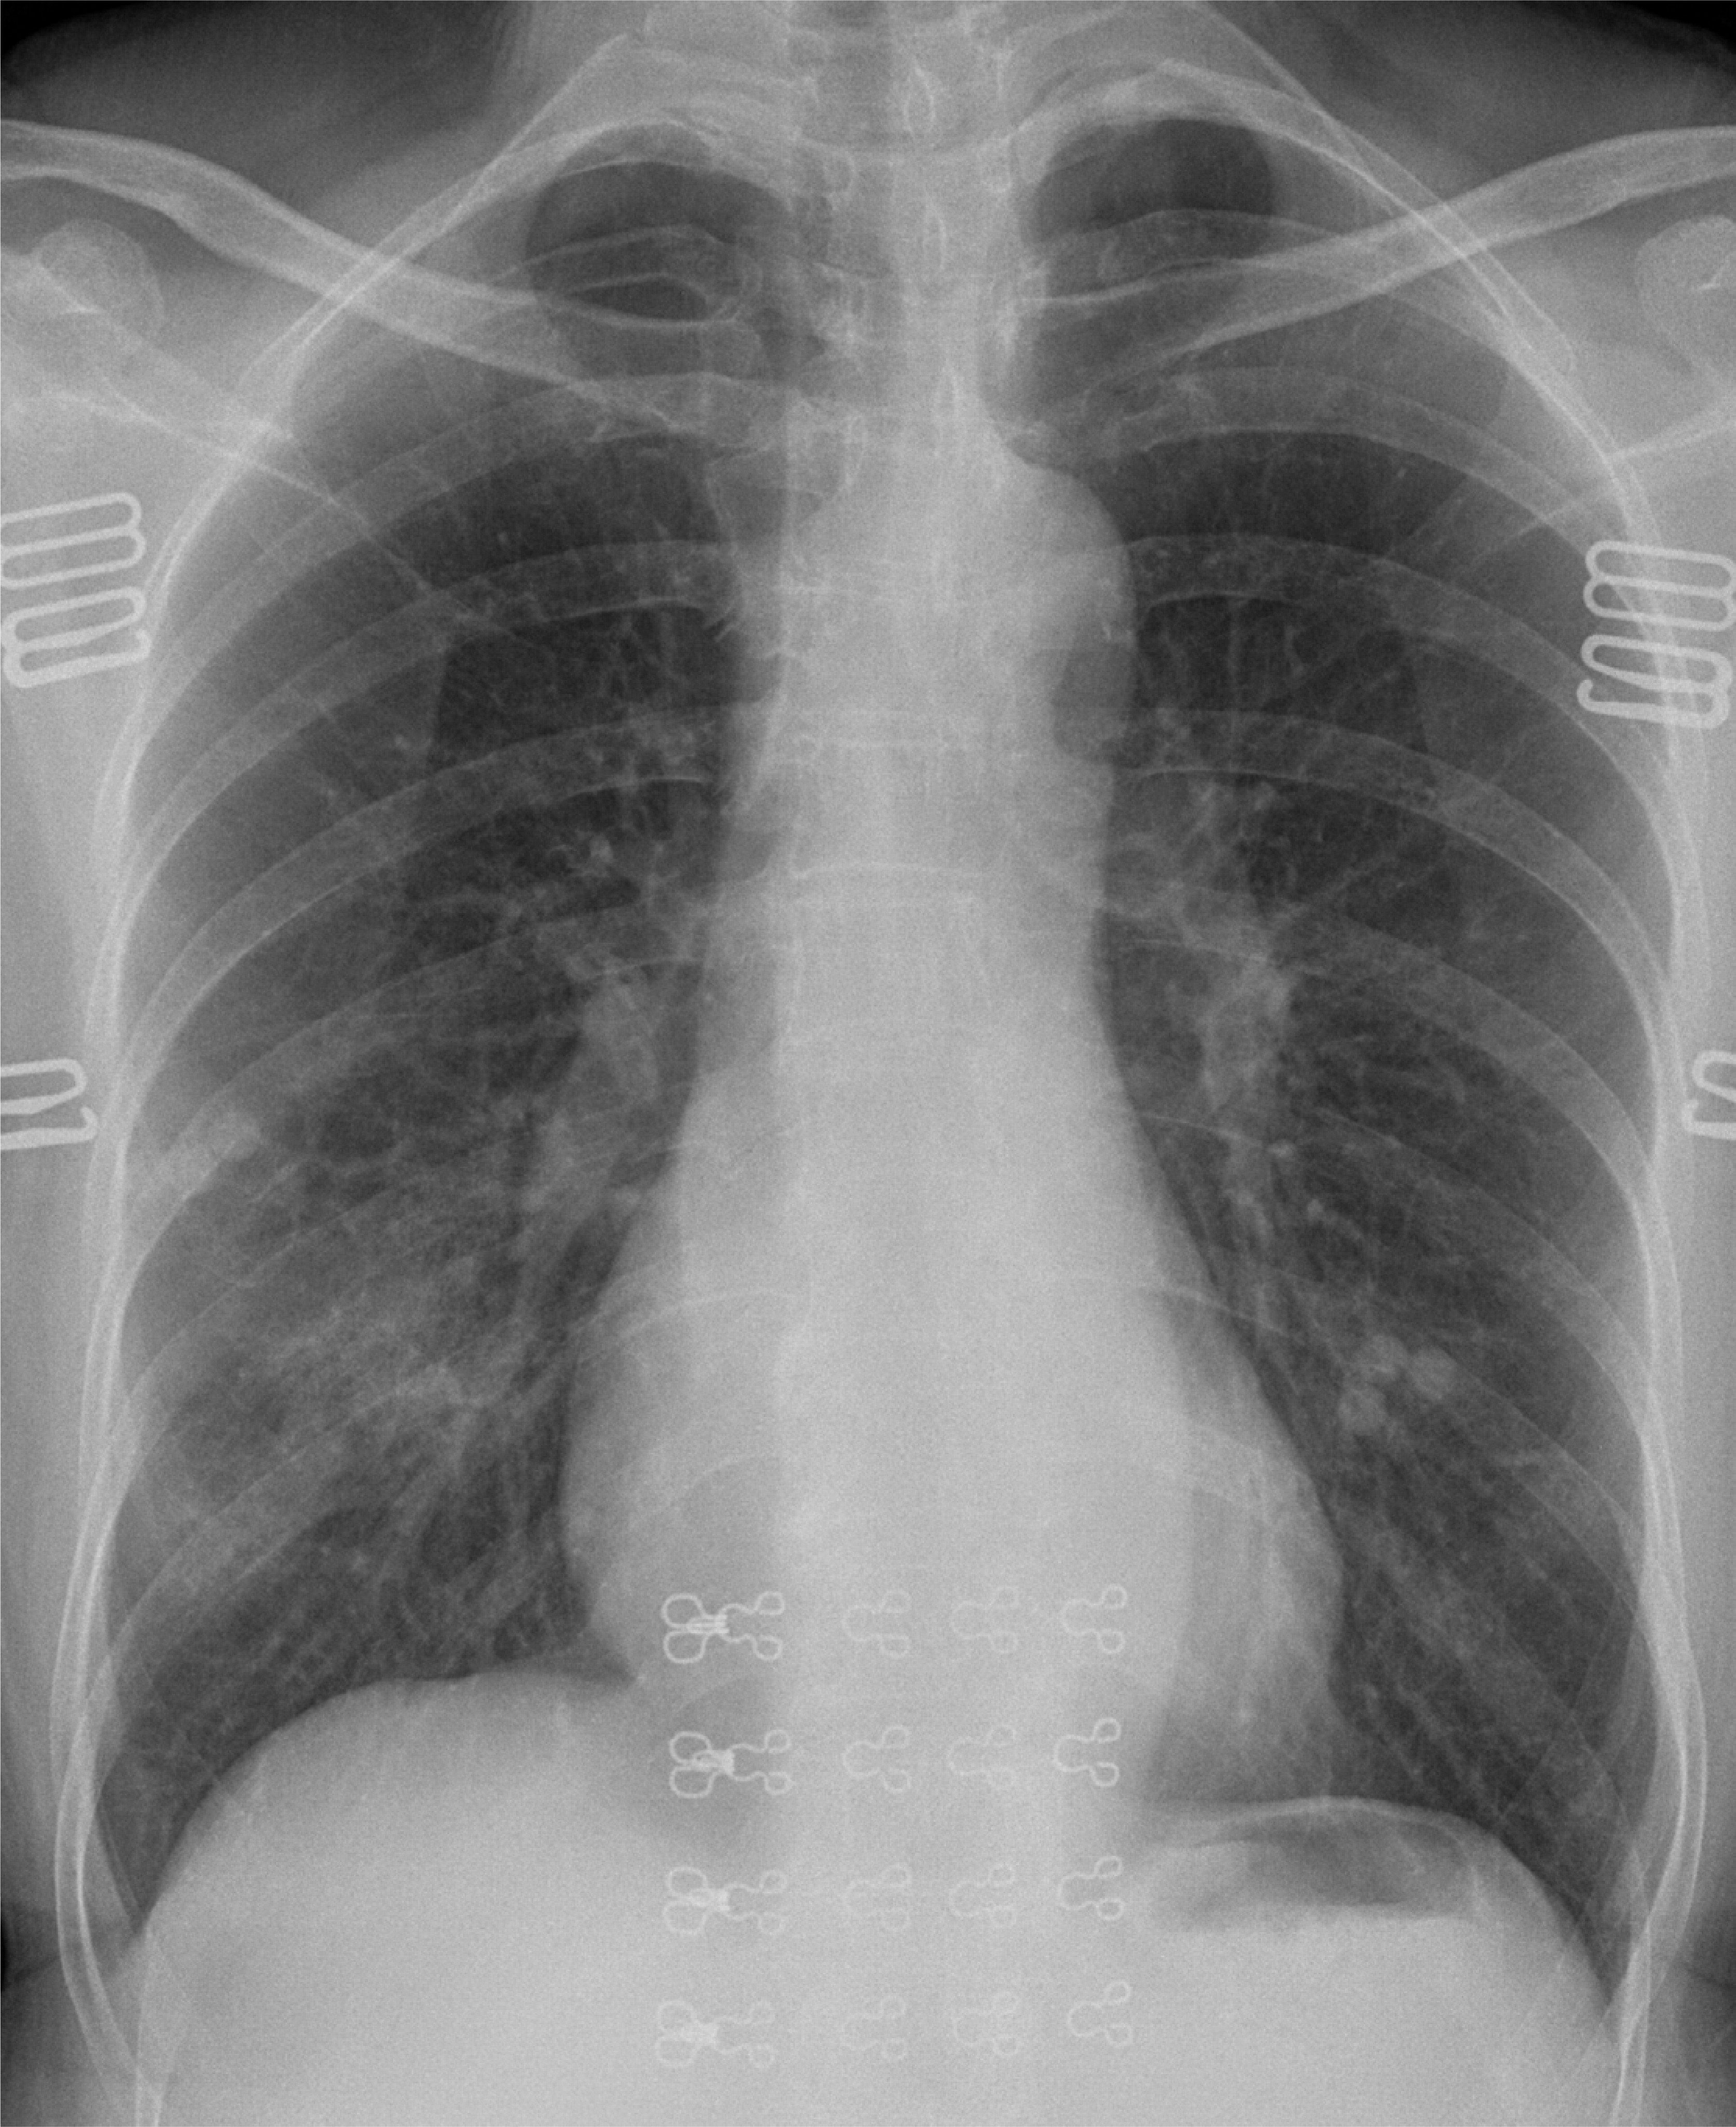 Chest X Rays Show More Severe Covid 19 In Non White Patients Imaging Technology News